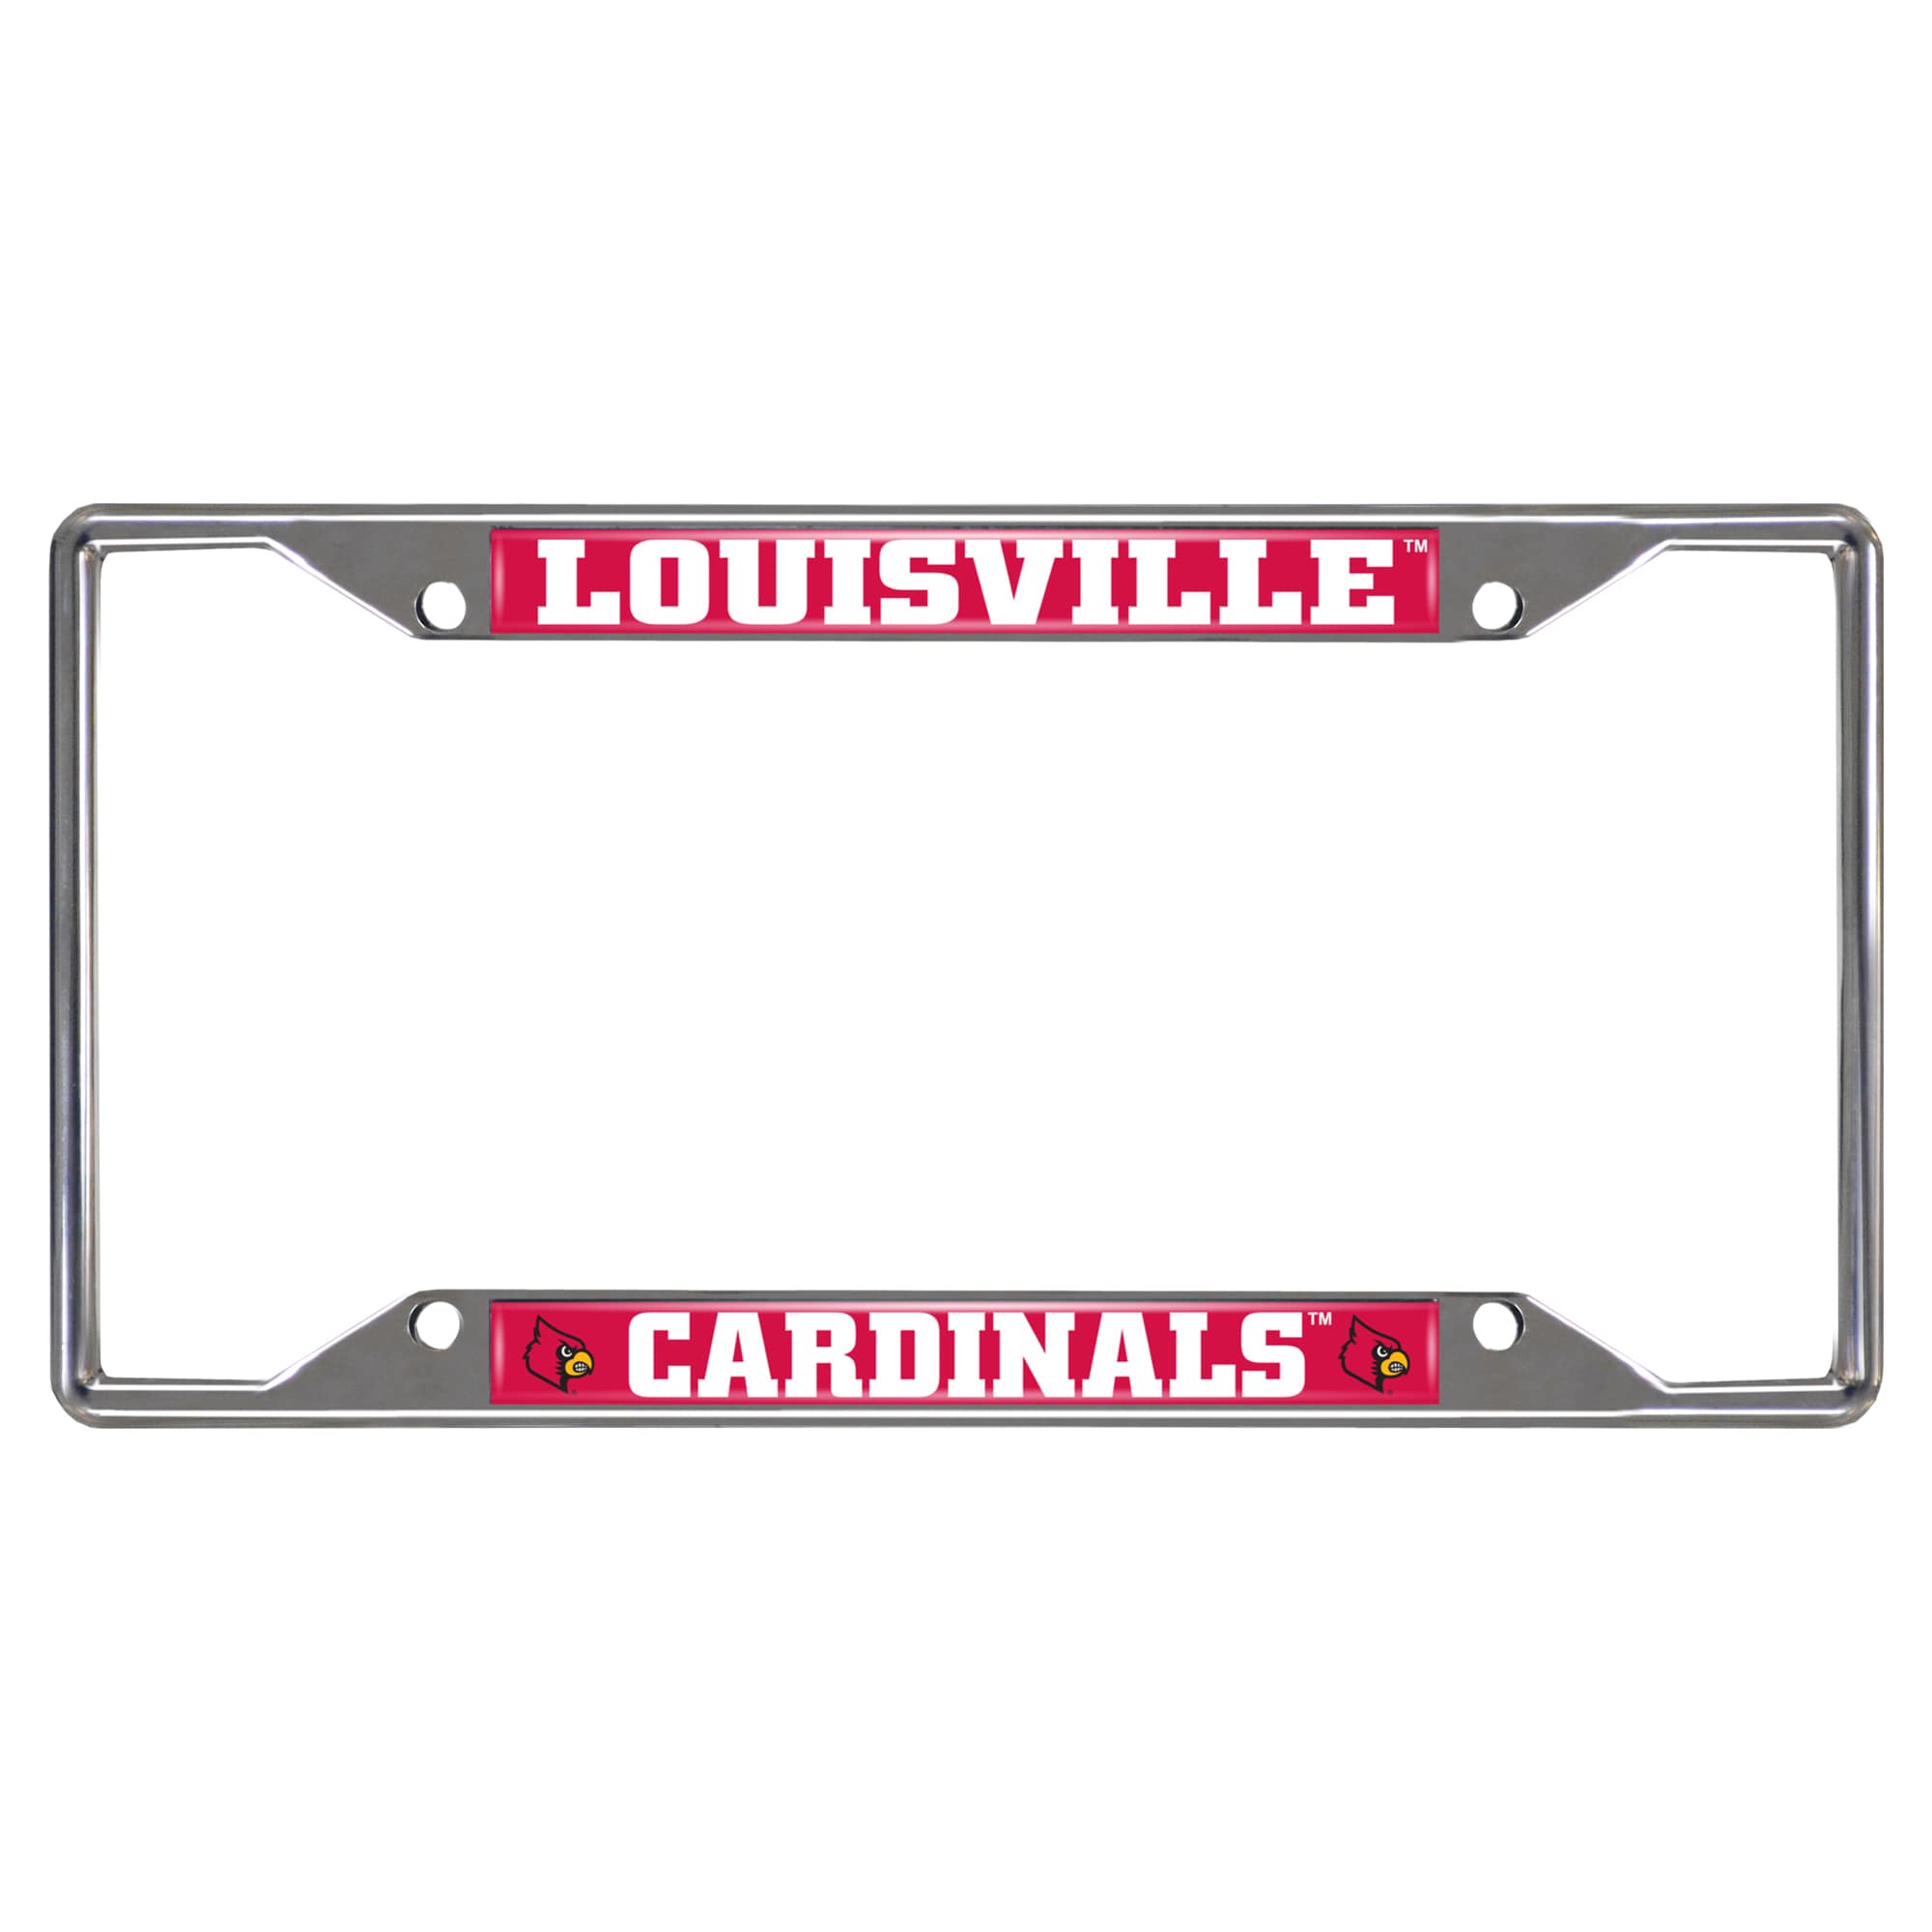 FANMATS Louisville Cardinals NCAA License Plate Frame at